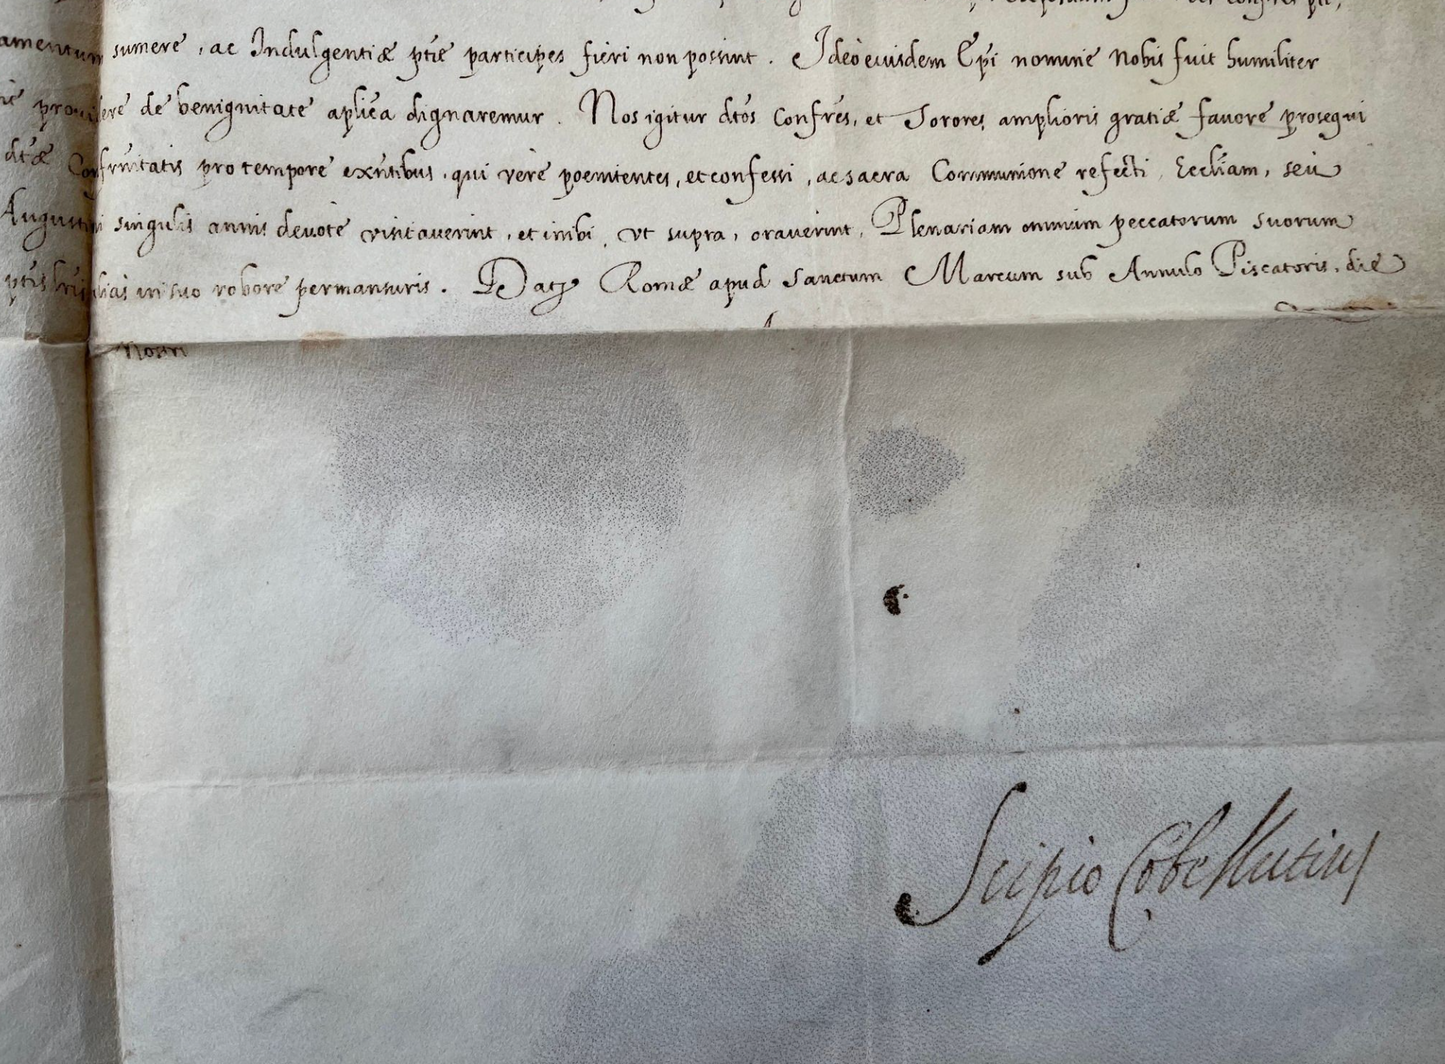 Indulgence from Pope Paul V, signed by Scipio Cobelluzi